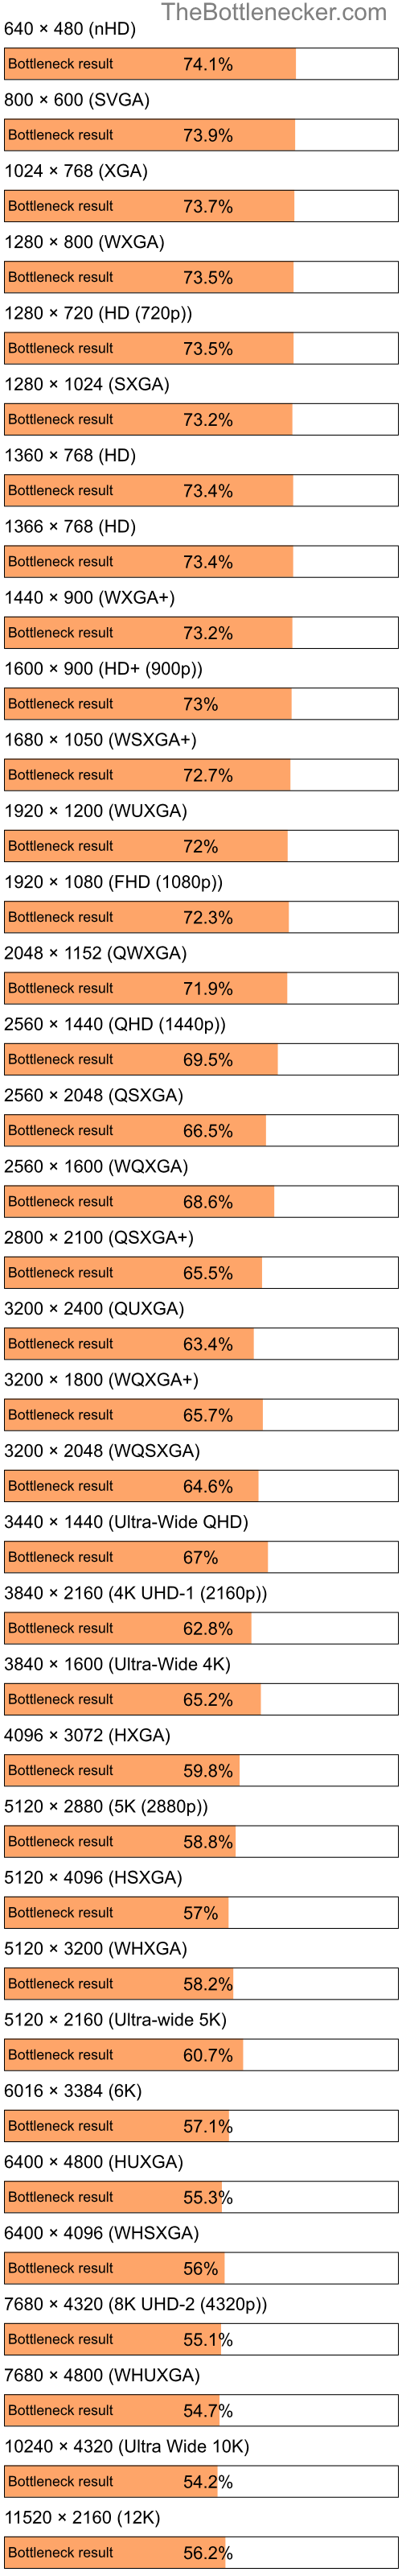 Bottleneck results by resolution for Intel Pentium 4 and NVIDIA GeForce GTX 1060 in Graphic Card Intense Tasks